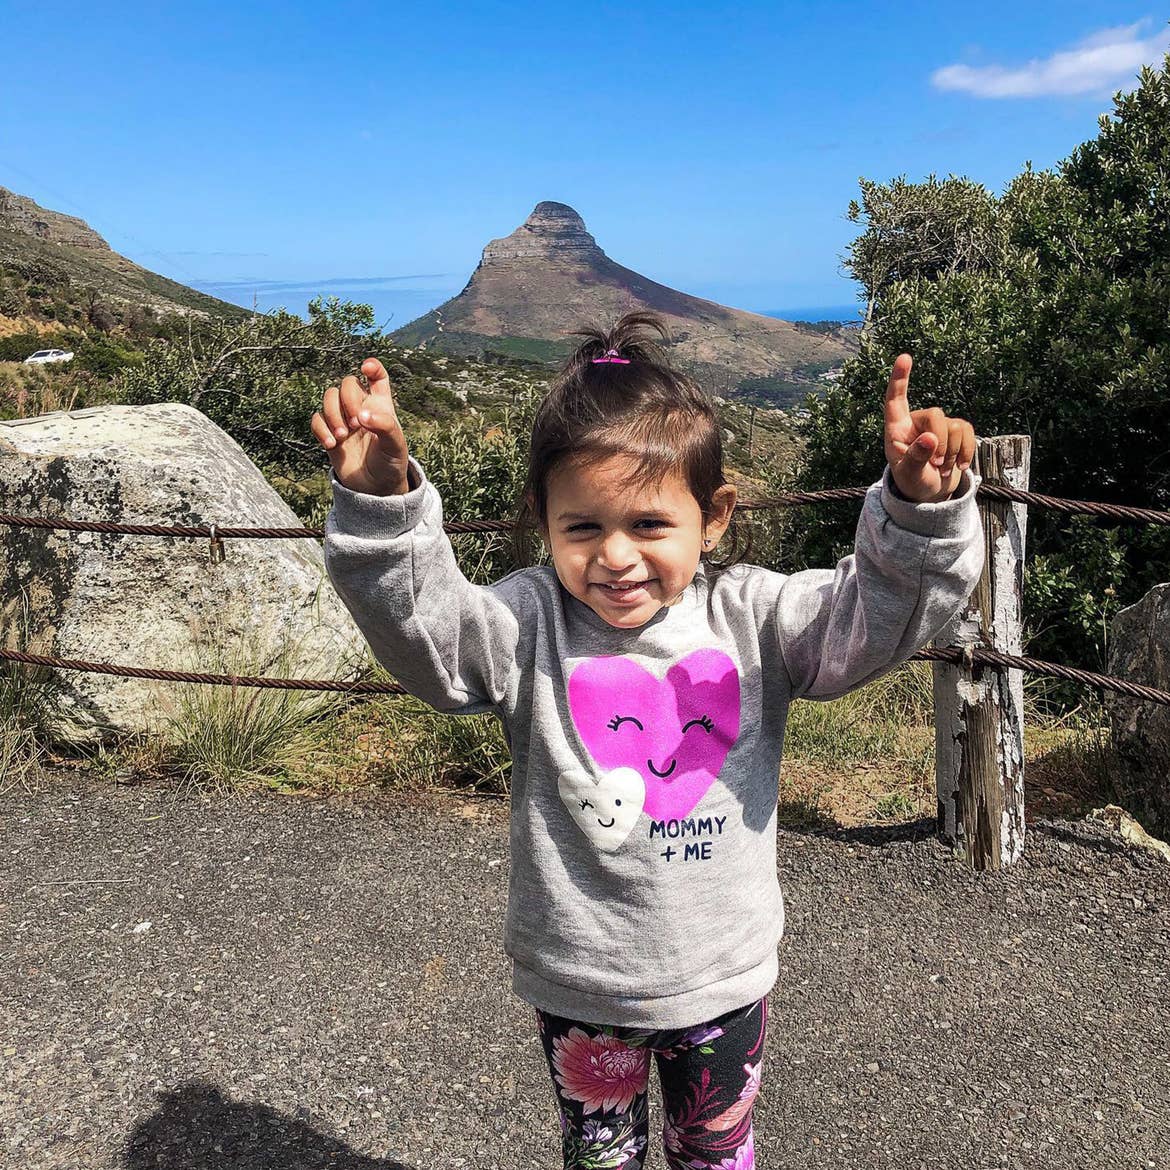 Featured Contributor, Karishma Kittur's daughter holds her fists up in the air as she accomplished climbing up a trail